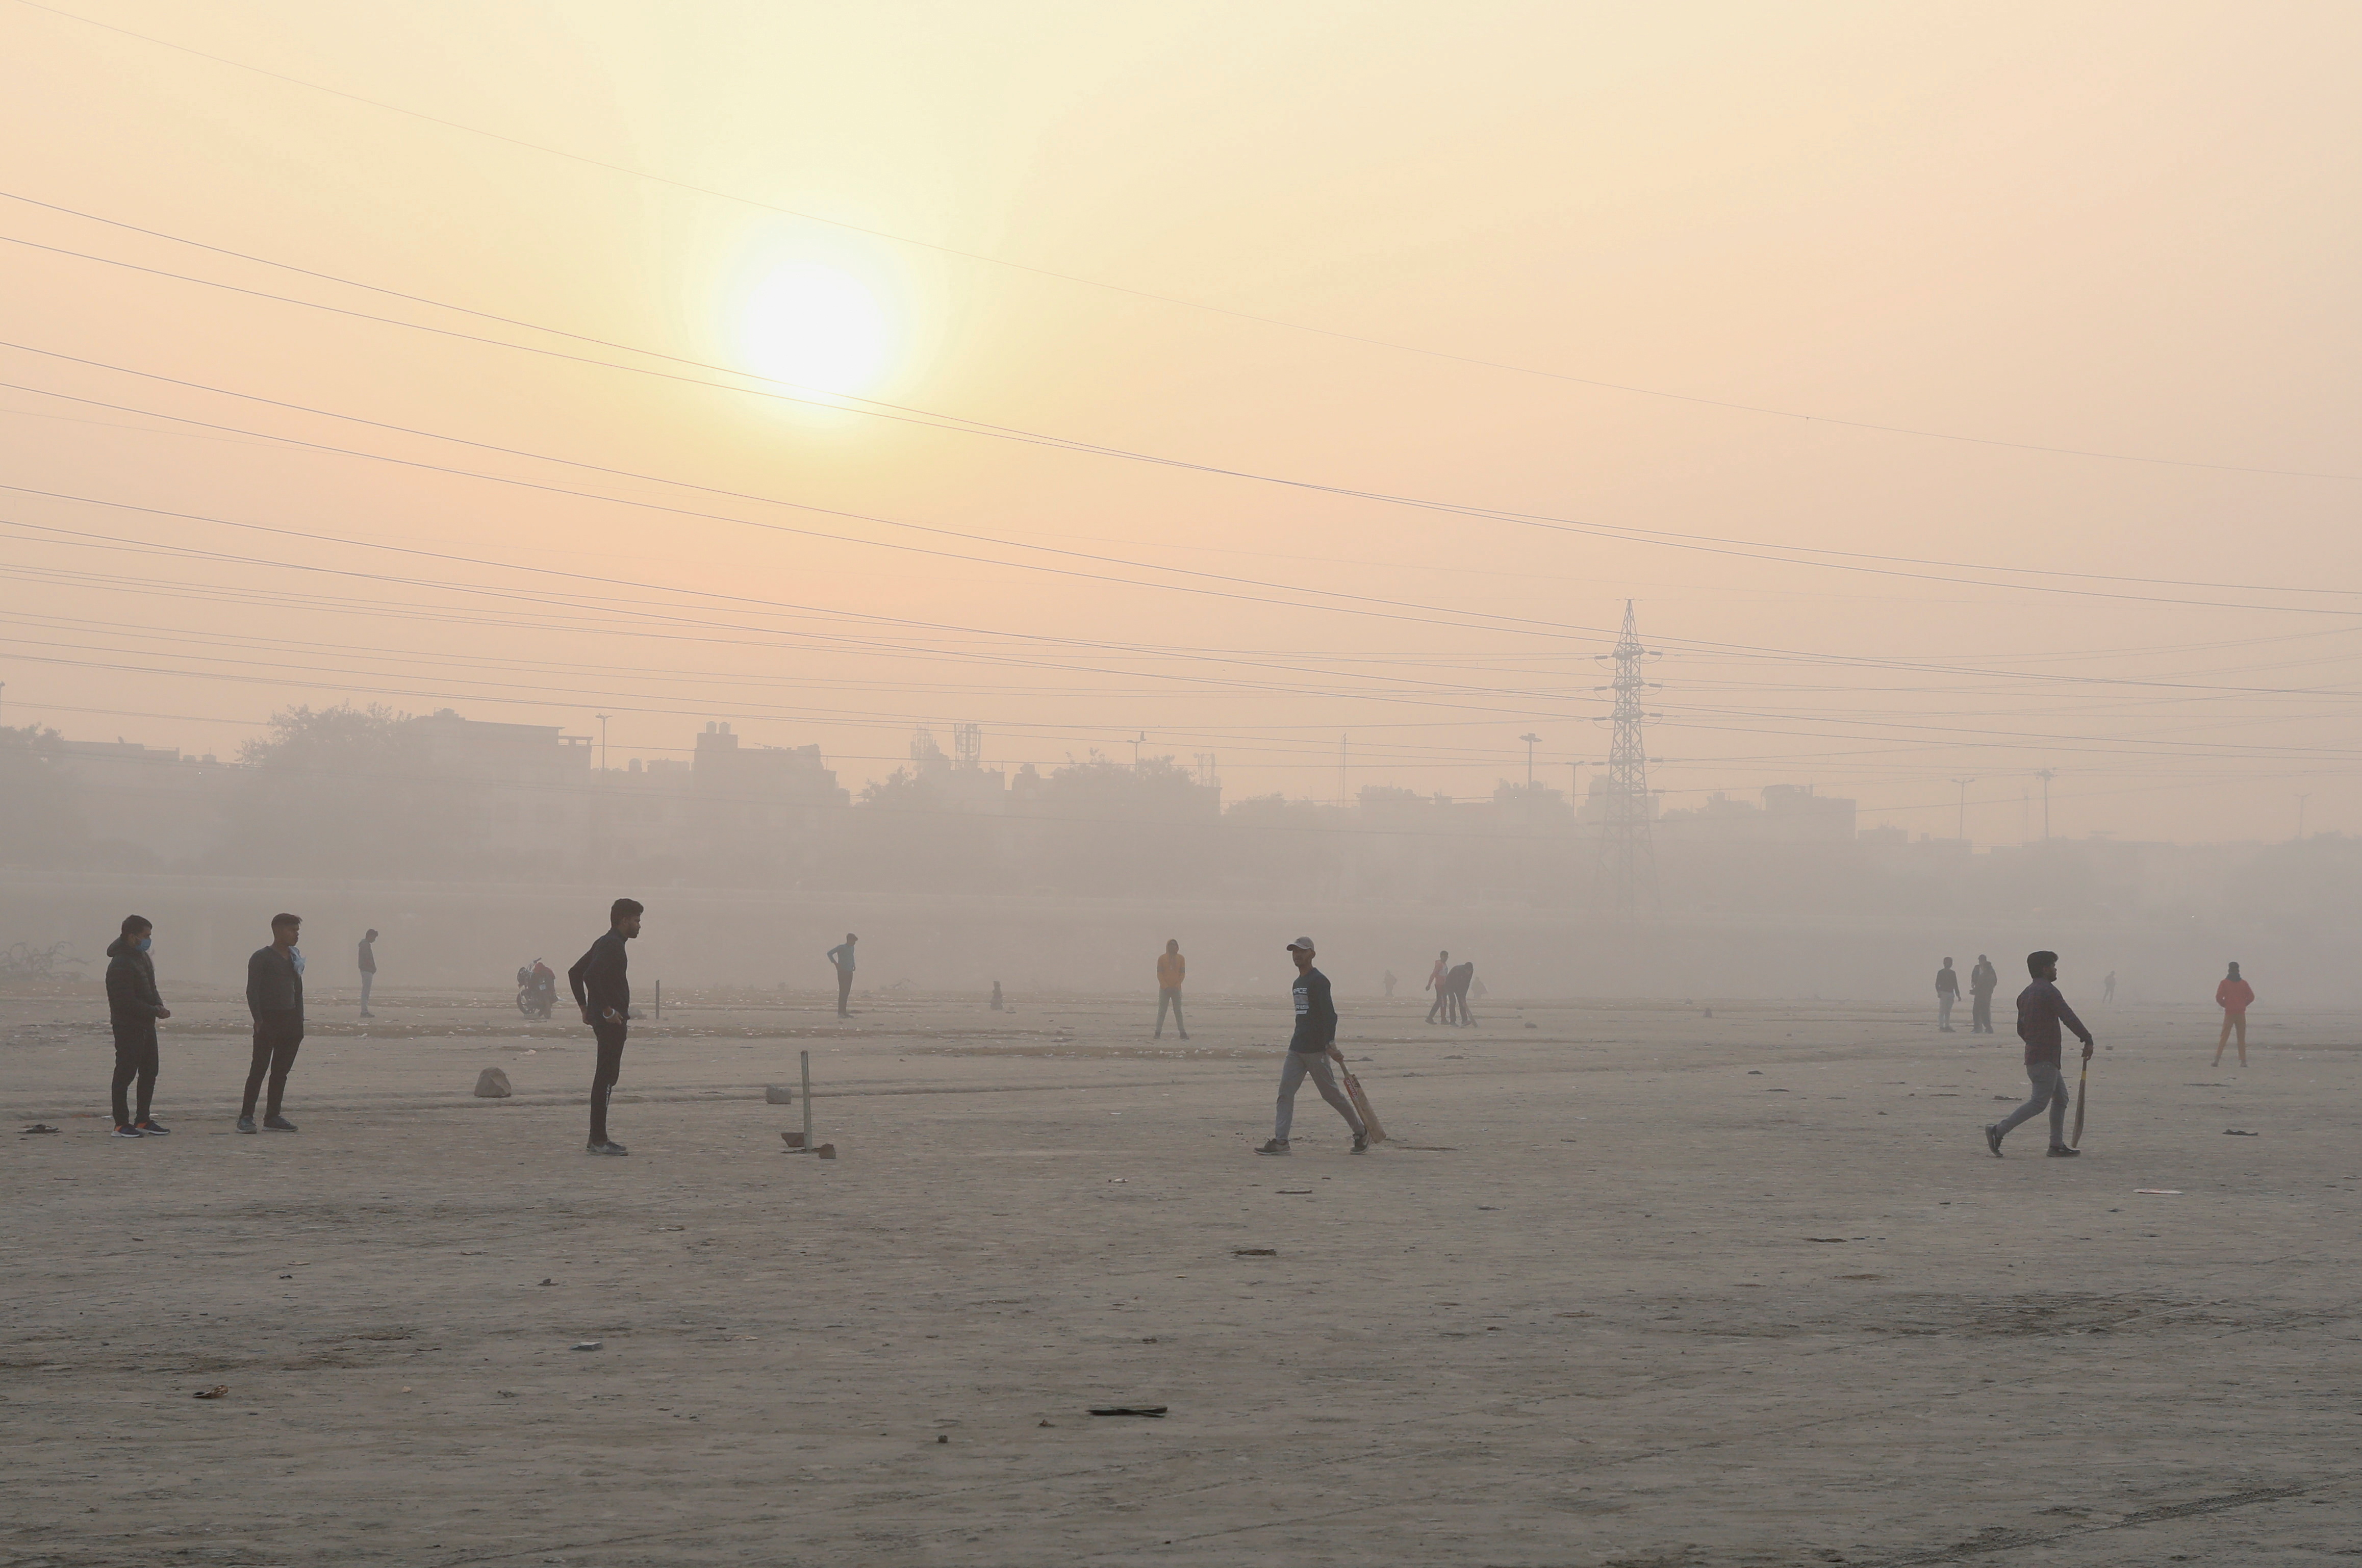 People play cricket on the floodplains of the Yamuna river on a smoggy morning in New Delhi, India, November 17, 2021. REUTERS/Anushree Fadnavis